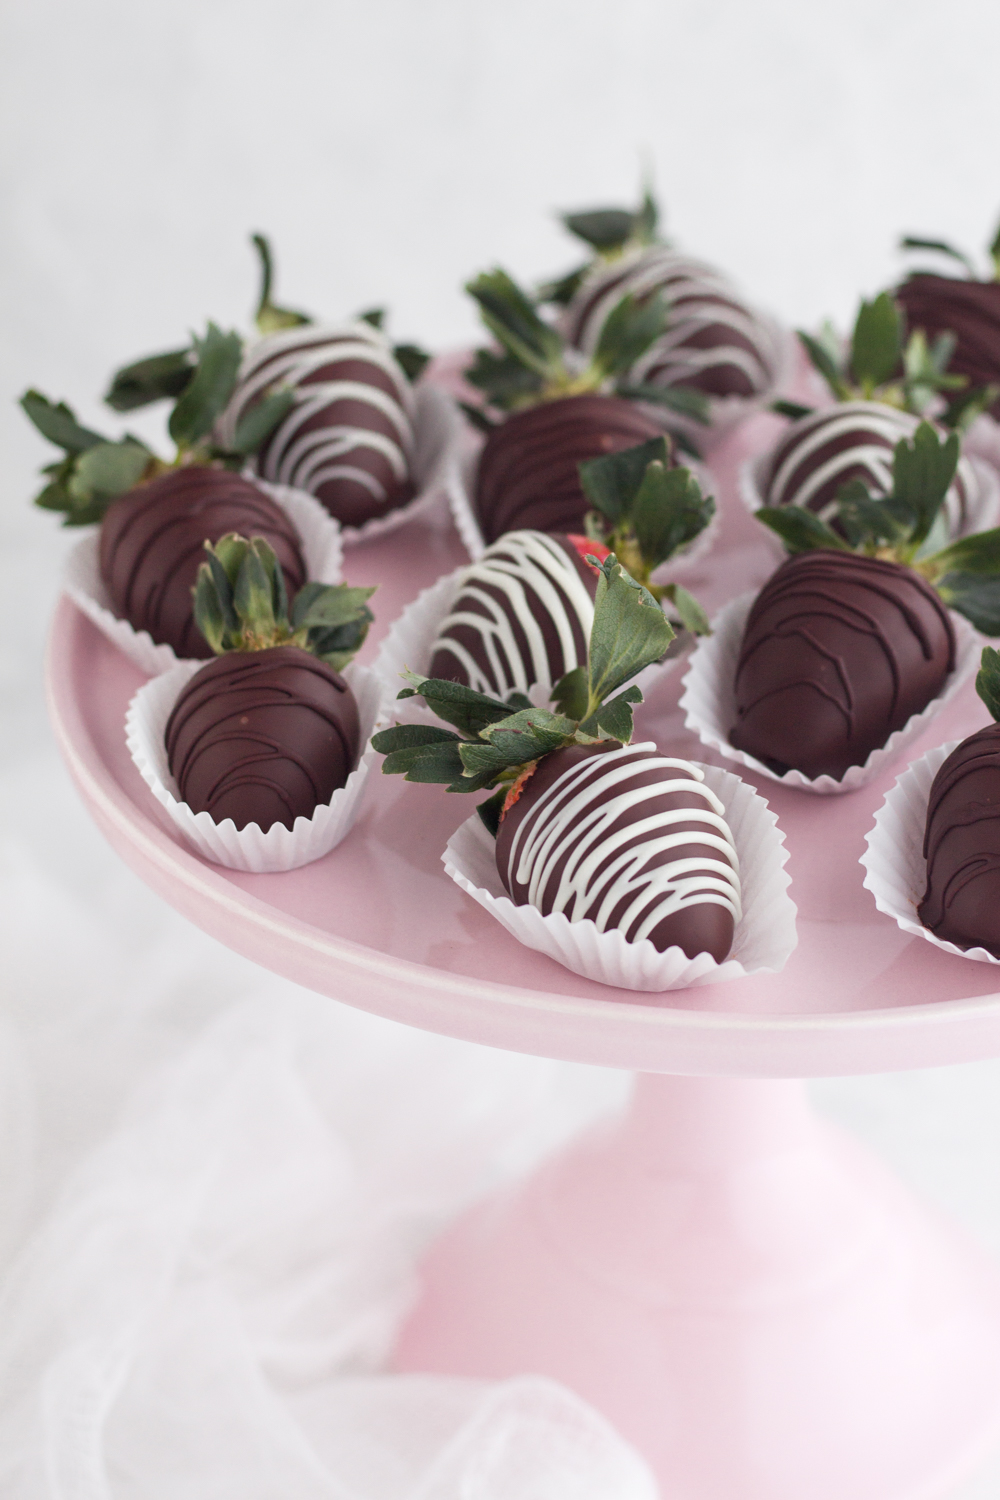 Angled view of chocolate covered strawberries on a pink cake stand.